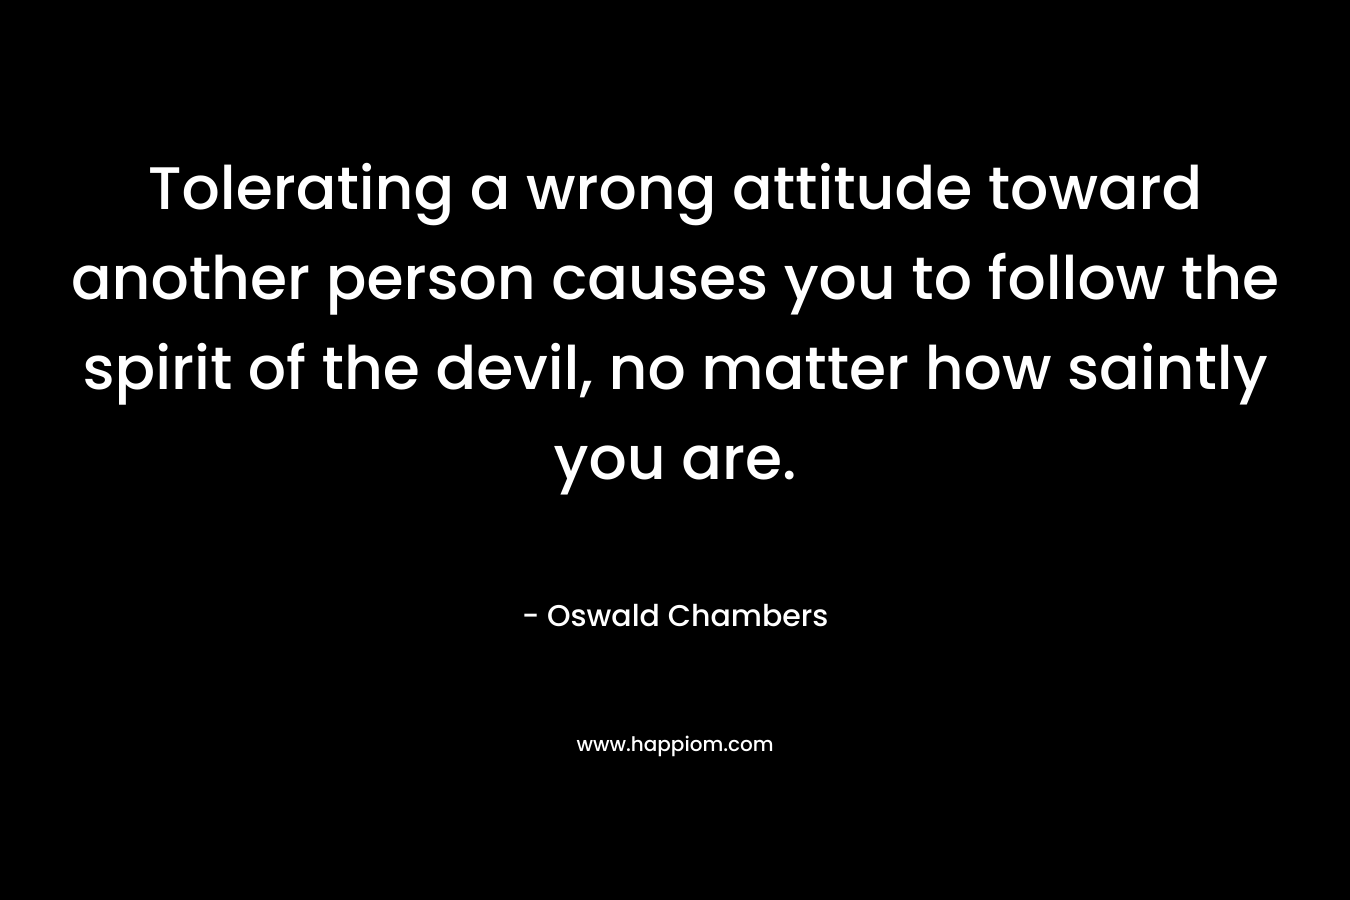 Tolerating a wrong attitude toward another person causes you to follow the spirit of the devil, no matter how saintly you are. – Oswald Chambers